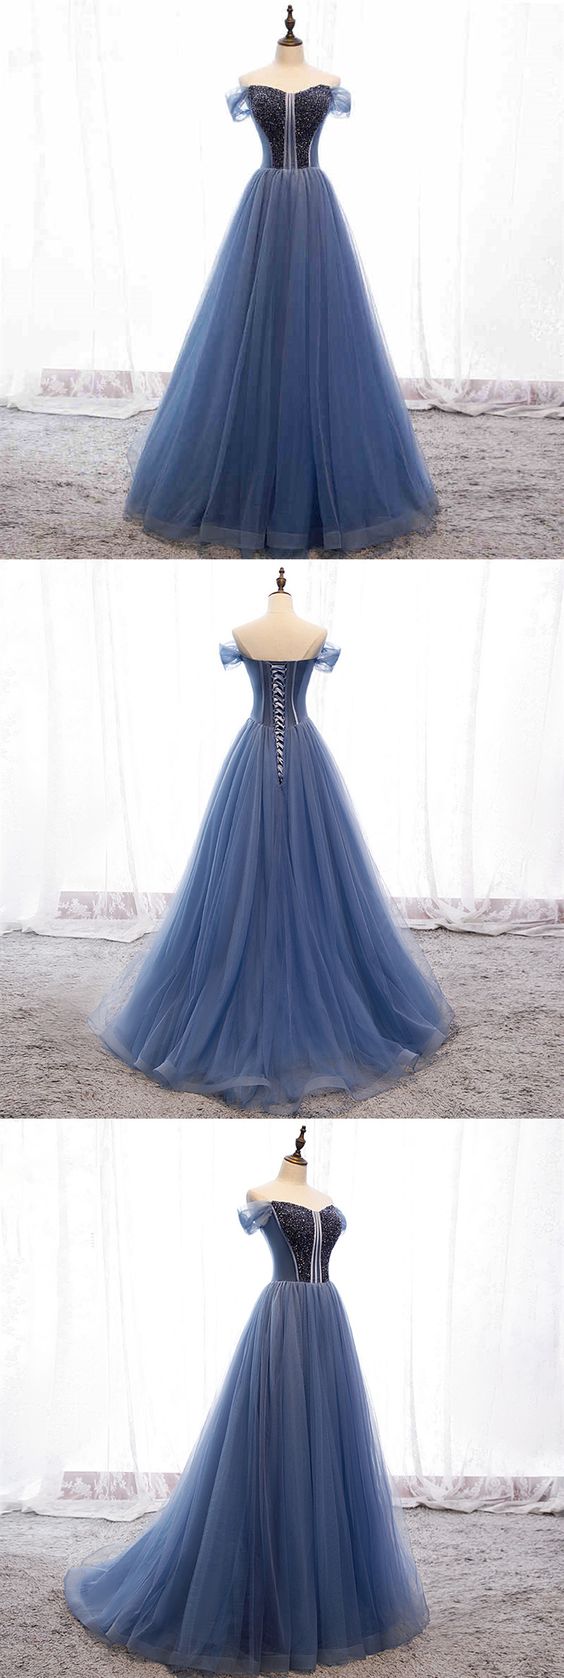 Modest Tulle A Line Long Prom Dresses Cap Sleeve Sweetheart Stunning Beading Prom/Evening Dress  cg2043